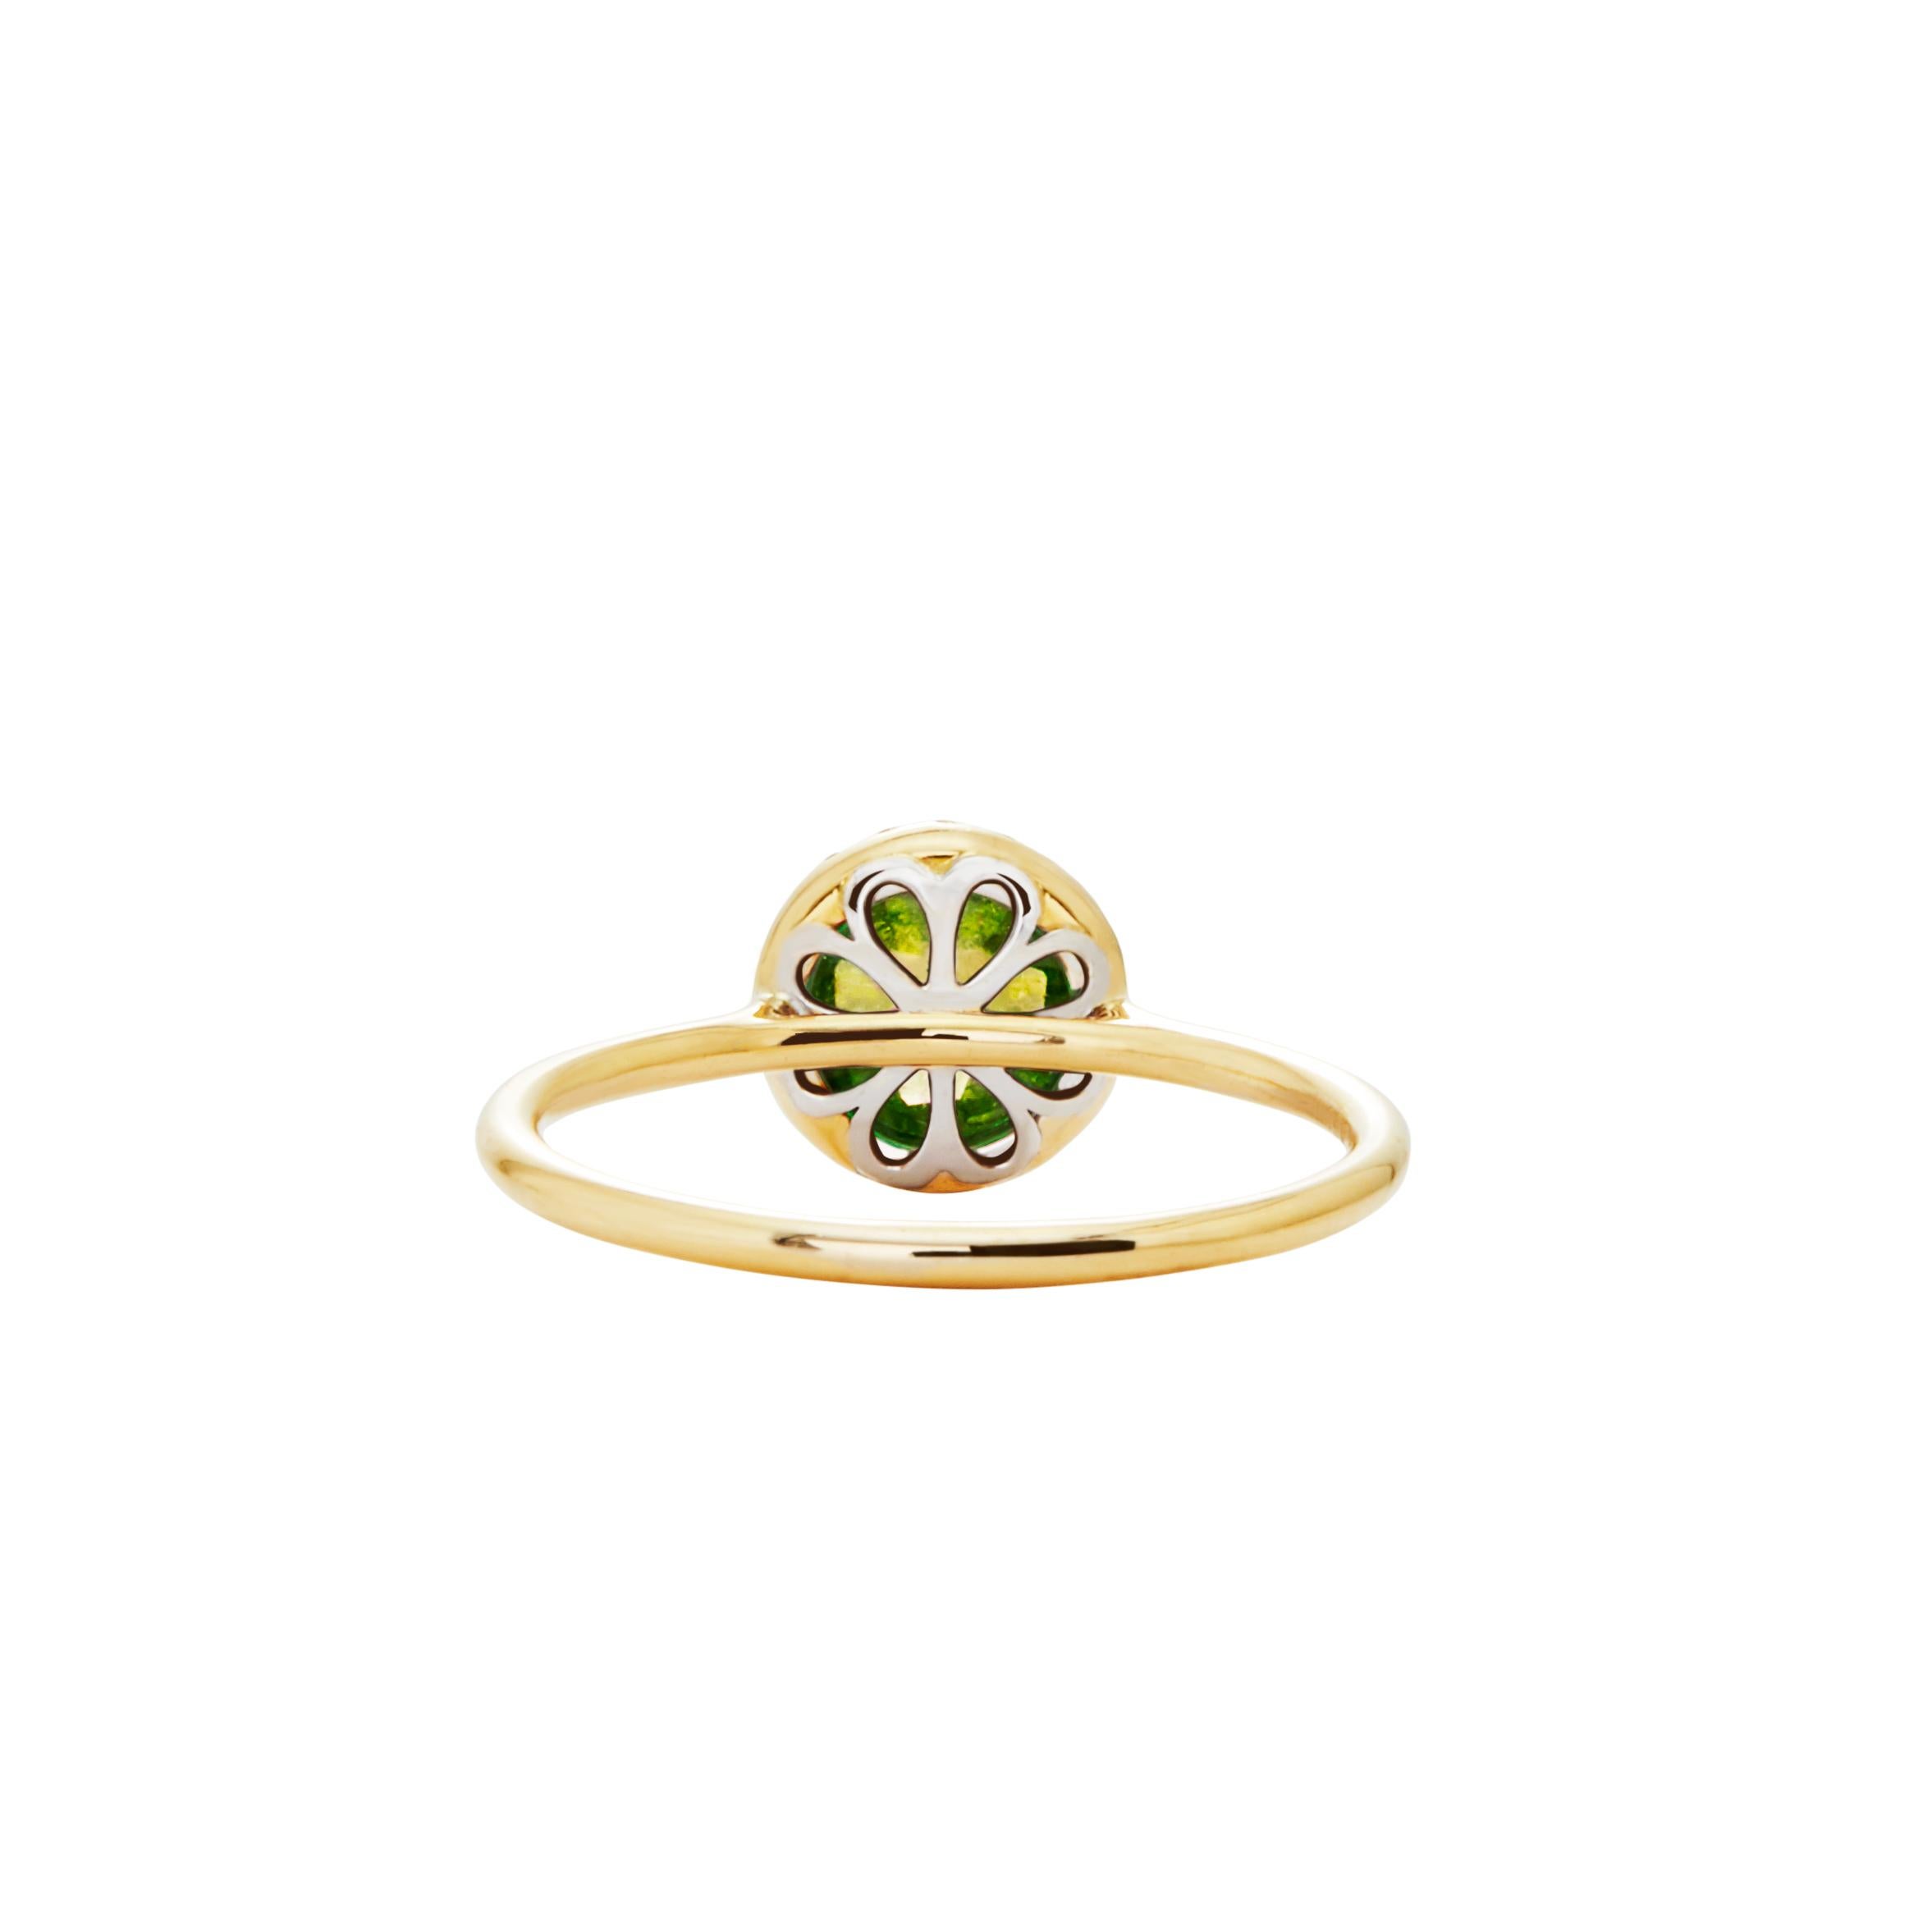 2.16 Carat Checkerboard Peridot Halo Ring in 18 Karat Yellow Gold In New Condition For Sale In London, London